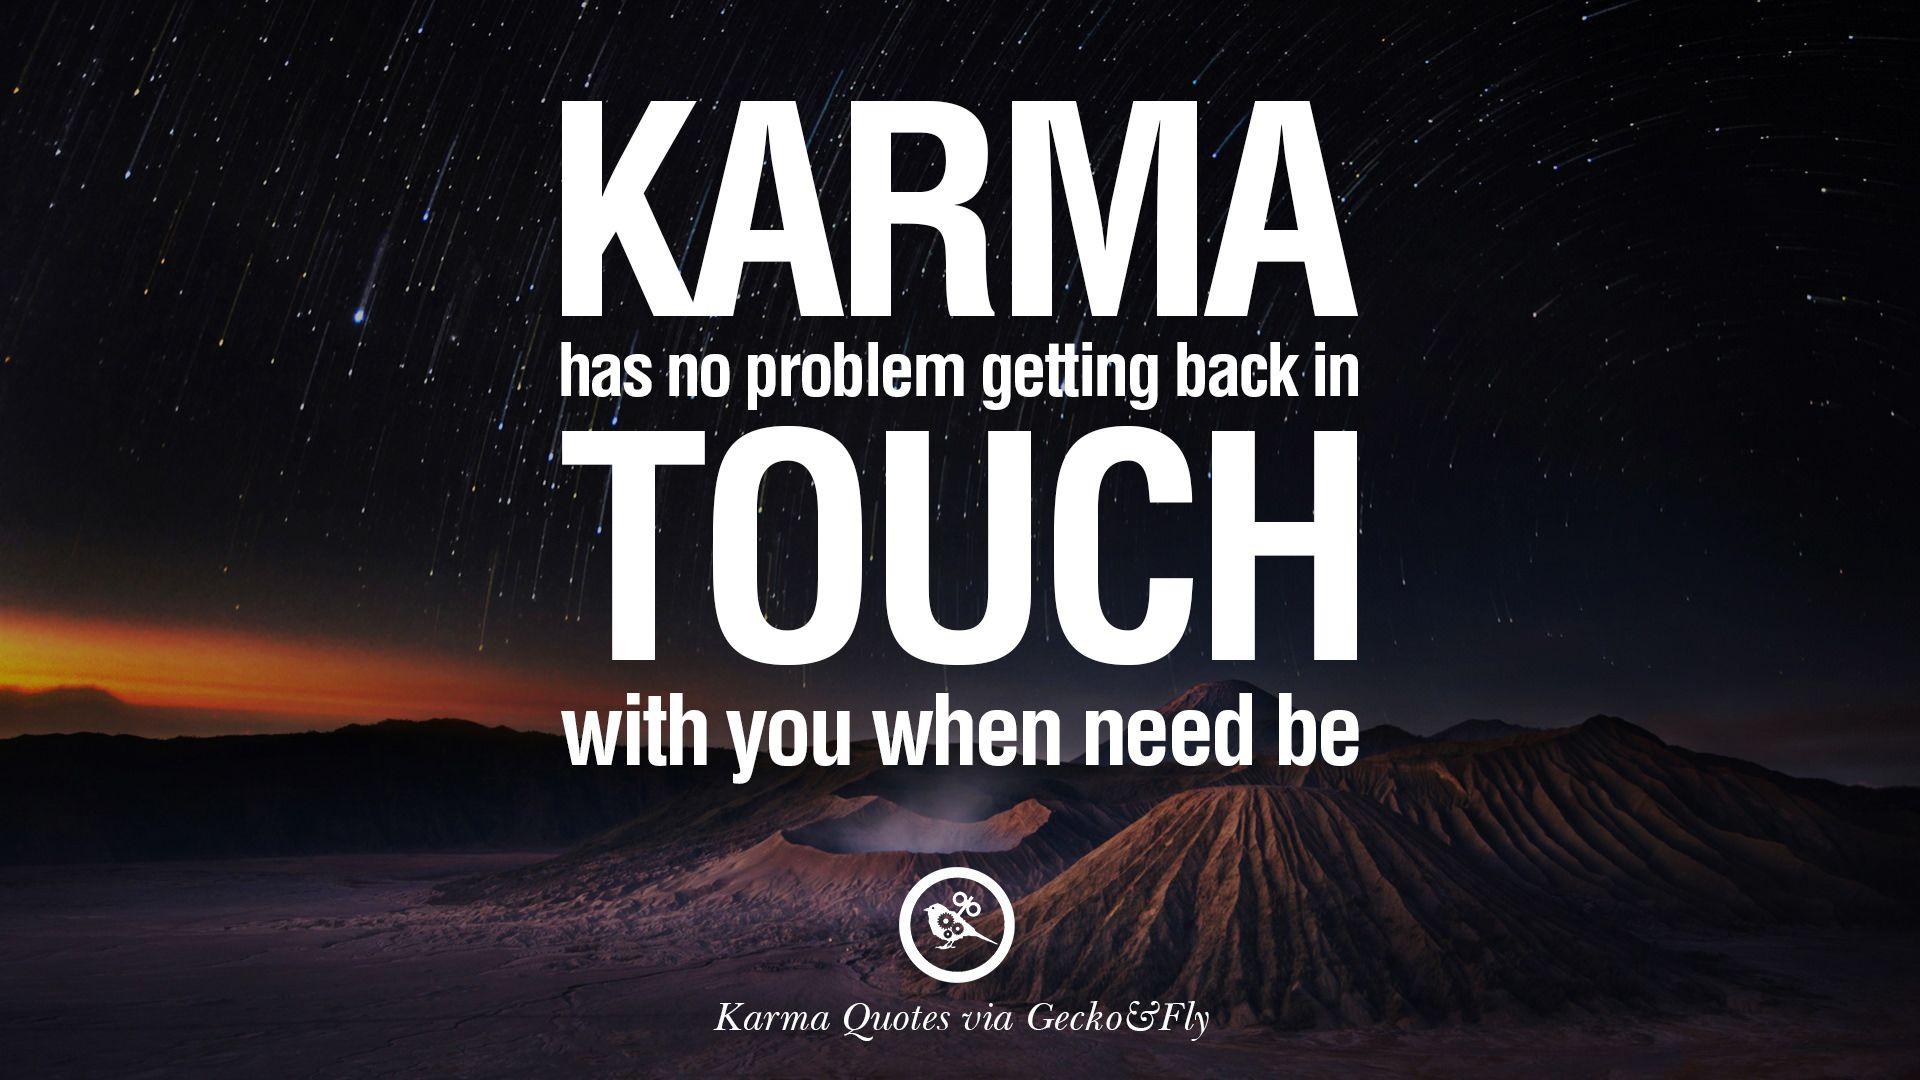 Good Karma Quotes on Relationship, Revenge and Life